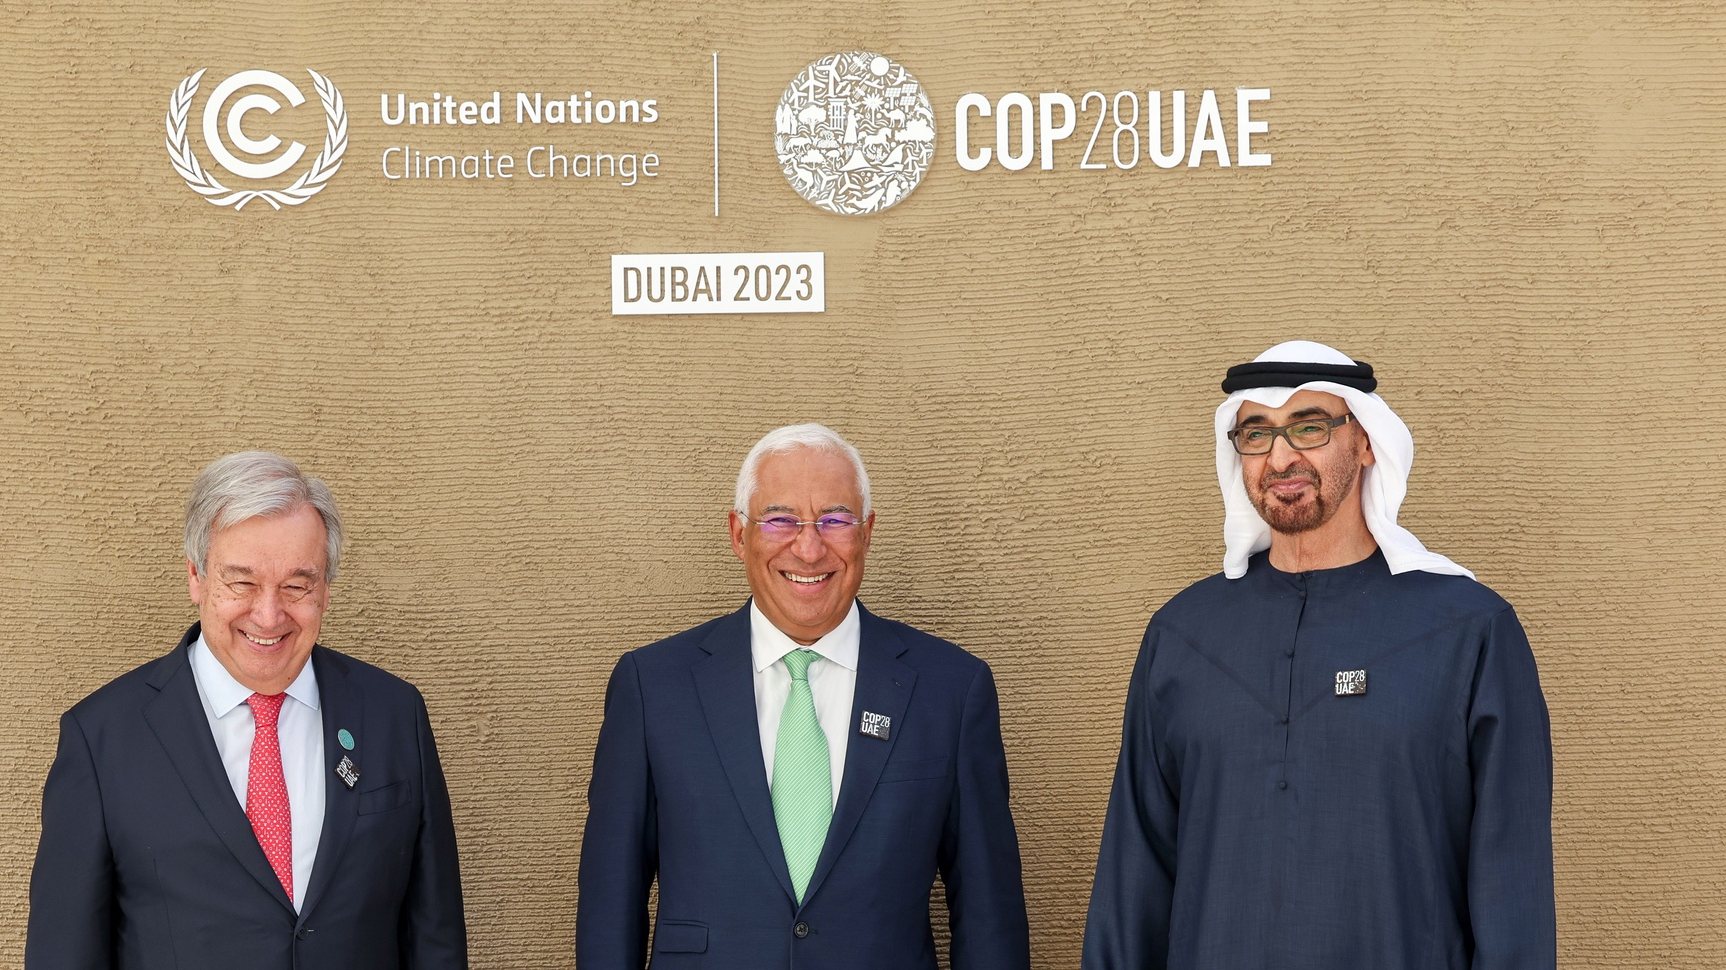 epa11005455 A handout photo made available by the UN Press Office shows (L-R) United Nations Secretary-General Antonio Guterres,  Portuguese Prime Minister Antonio Costa and Mohamed bin Zayed Al Nahyan, President of the United Arab Emirates and ruler of Abu Dhabi, posing for a photo during the UN Climate Change Conference COP28, in Dubai, United Arab Emirates, 01 December 2023. The 2023 United Nations Climate Change Conference (COP28), runs from 30 November to 12 December, and is expected to host one of the largest number of participants in the annual global climate conference as over 70,000 estimated attendees, including the member states of the UN Framework Convention on Climate Change (UNFCCC), business leaders, young people, climate scientists, Indigenous Peoples and other relevant stakeholders will attend.  EPA/MAHMOUD KHALED/ UN PRESS OFFICE / HANDOUT  HANDOUT EDITORIAL USE ONLY/NO SALES HANDOUT EDITORIAL USE ONLY/NO SALES